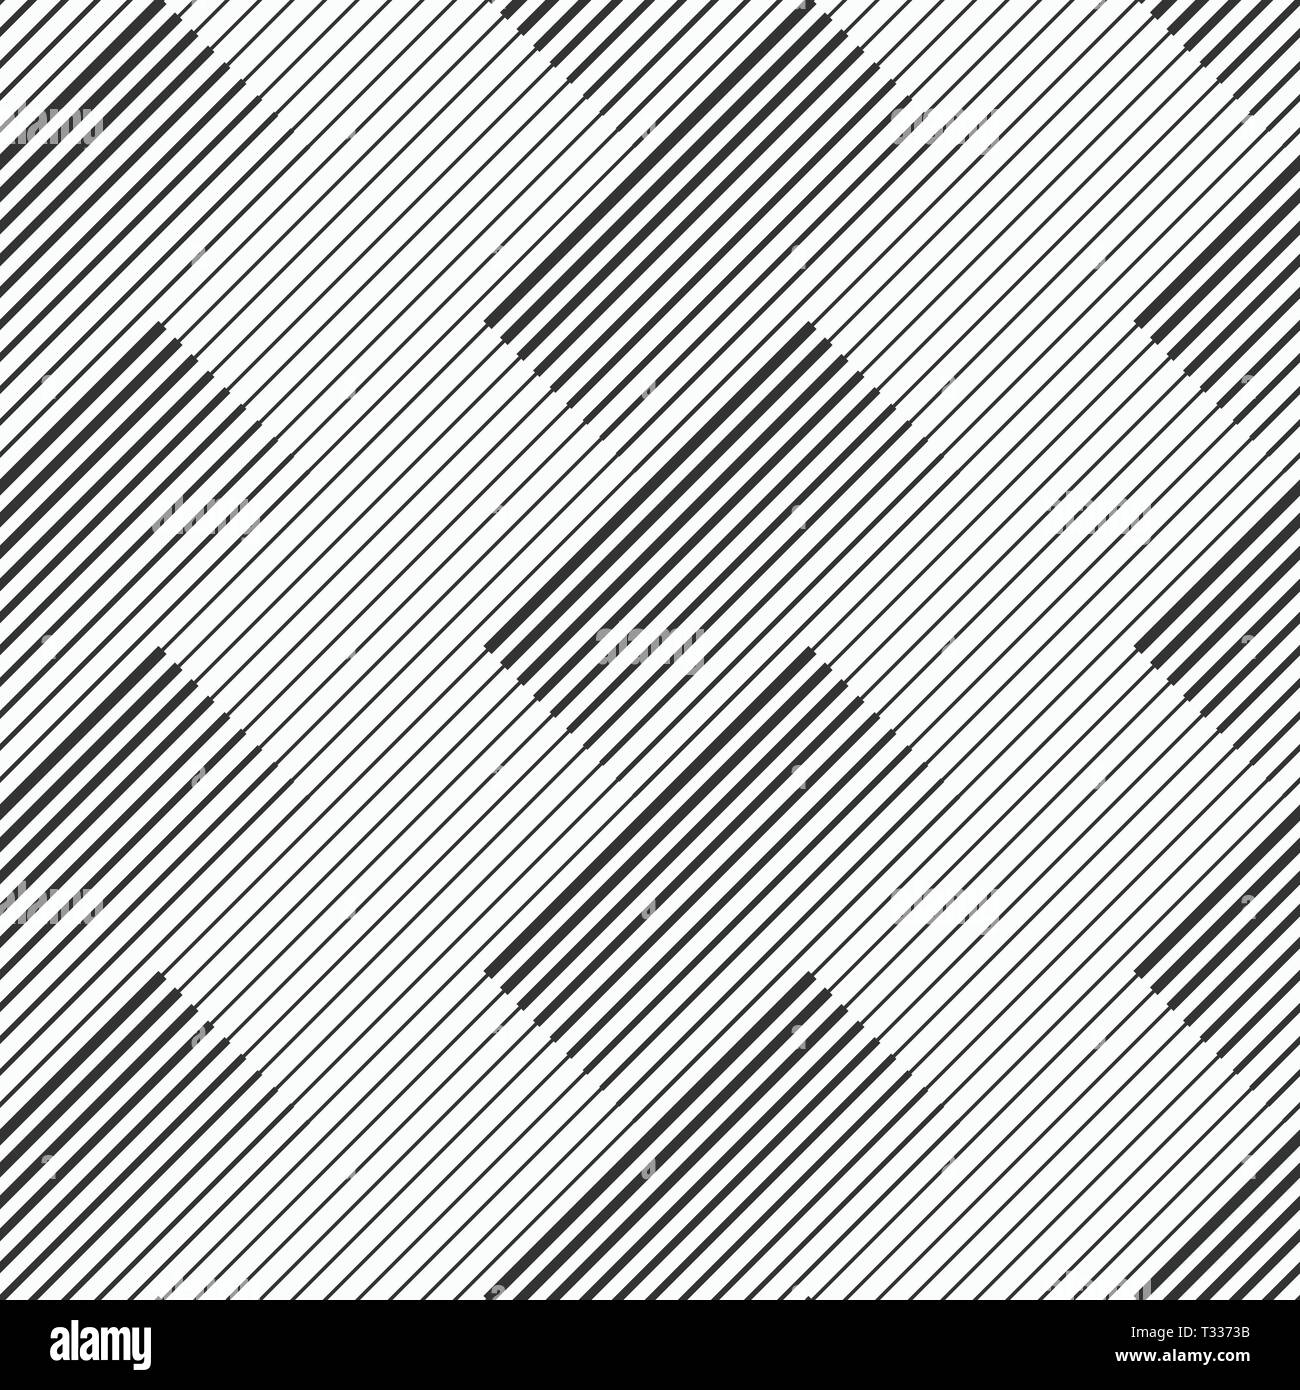 Abstract seamless pattern with diagonal lines of different thickness. Modern stylish diagonal striped texture. Vector monochrome background. Stock Vector